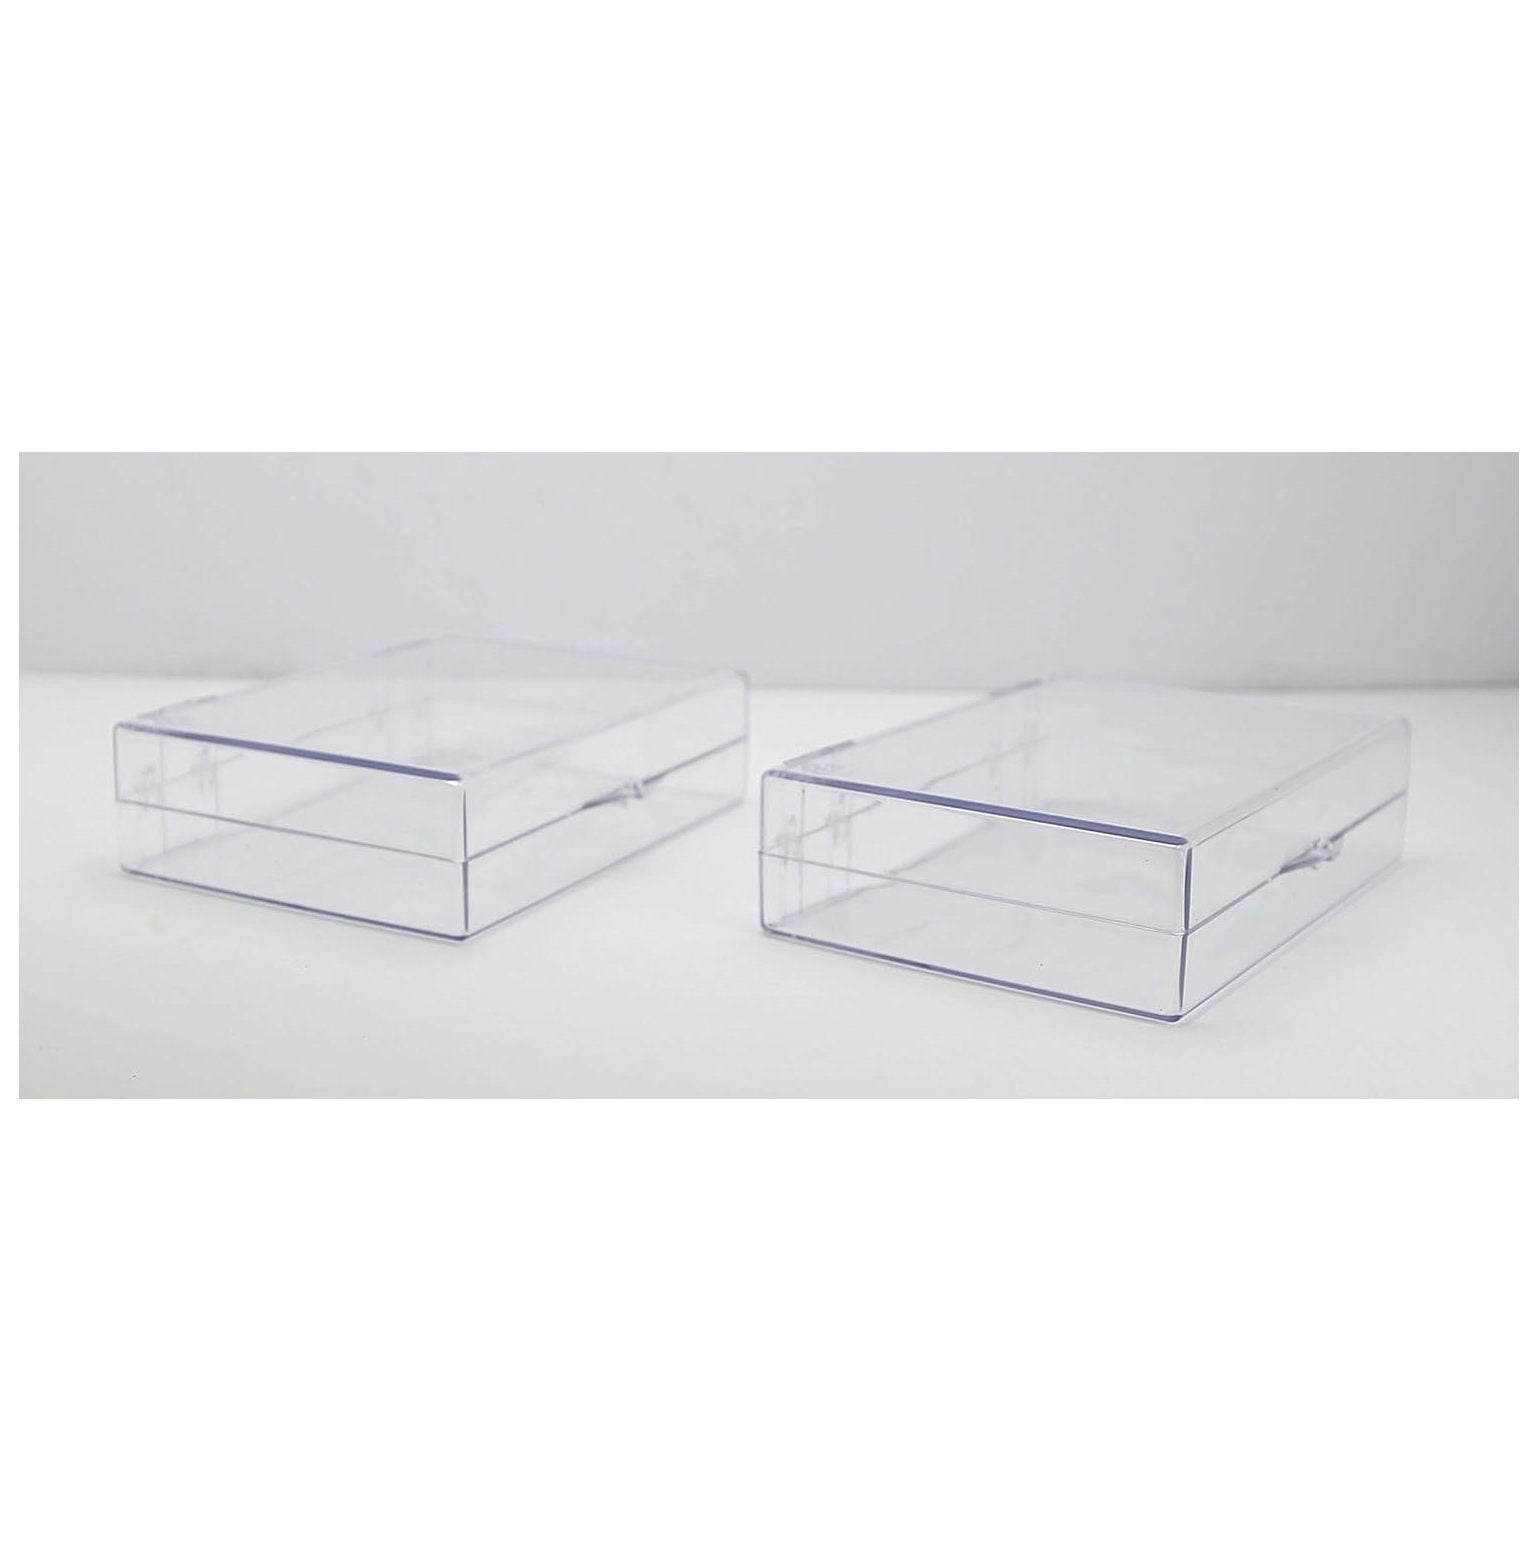 Clear Plastic Box with Removable Lid 1 L x 2 W x 3/4 Hgt.